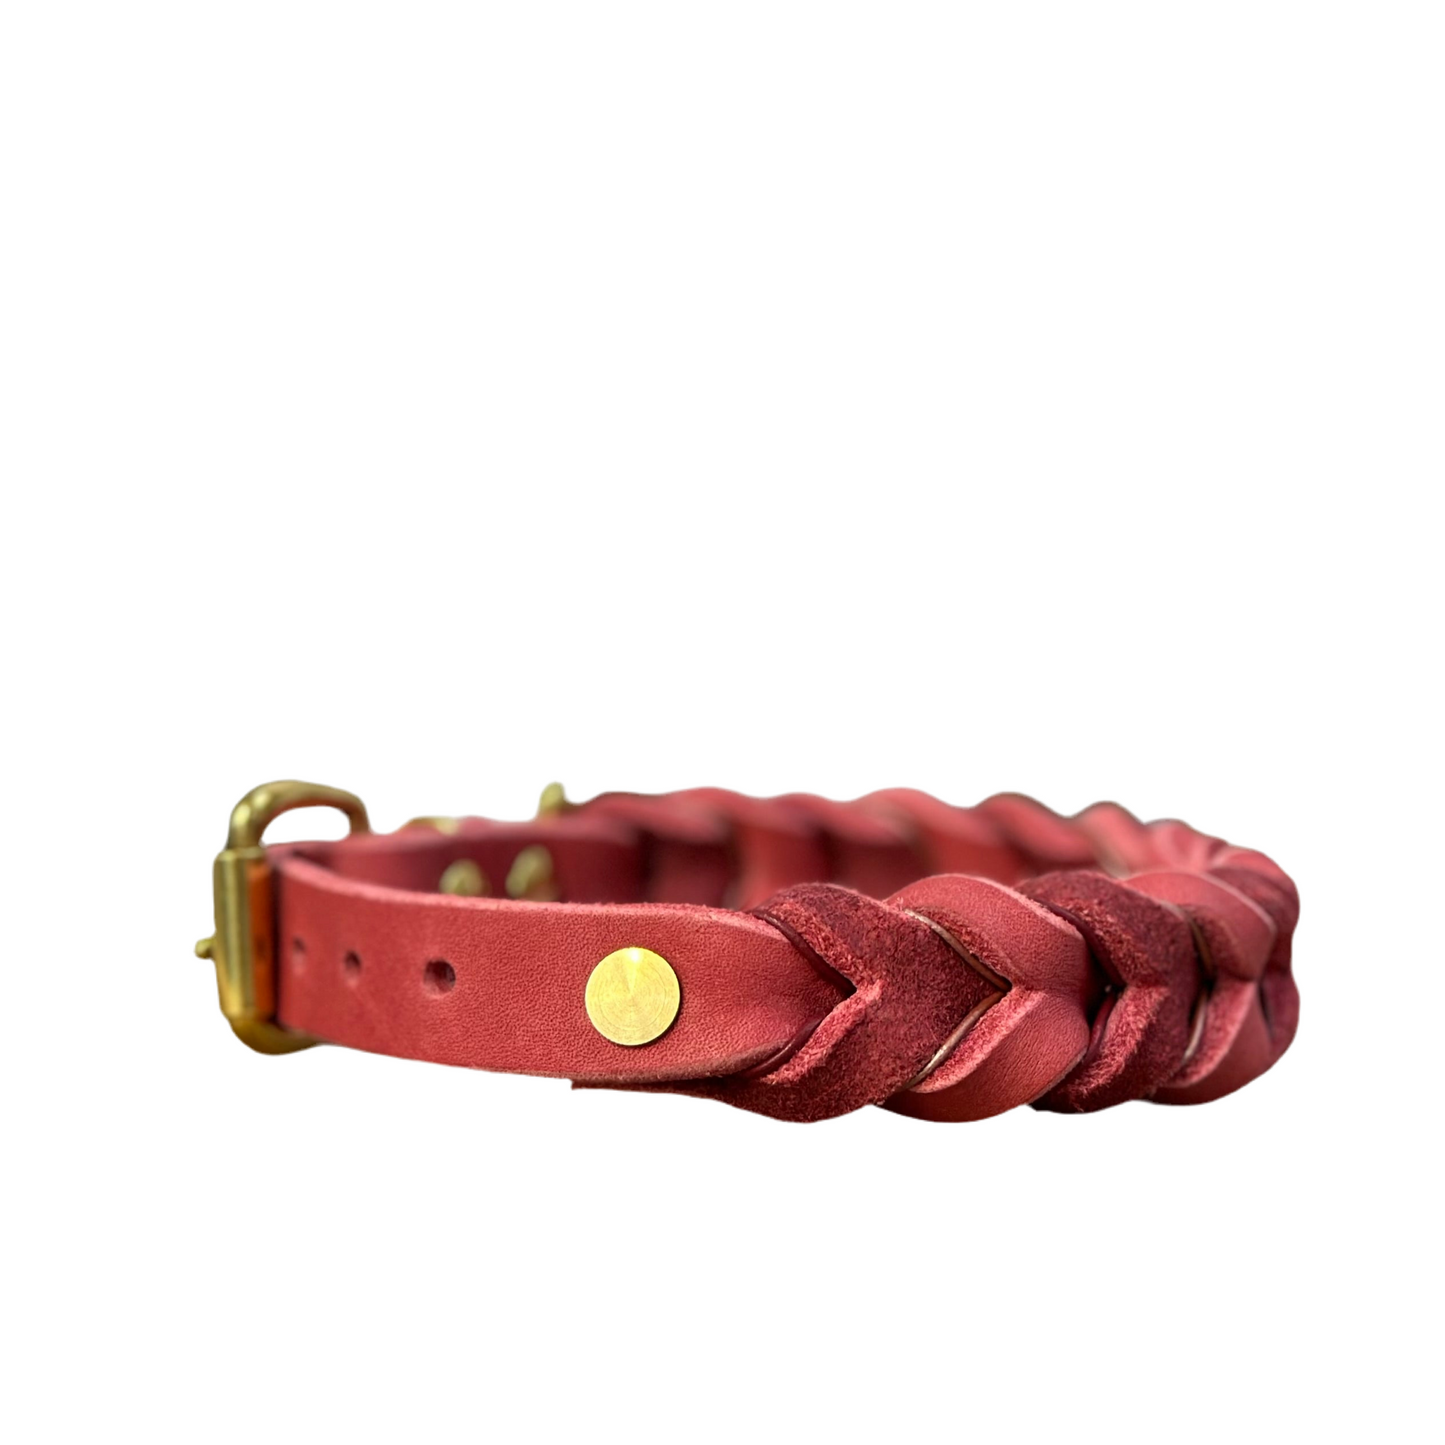 Fat leather braided leather collar ' MIRAGE ' old pink